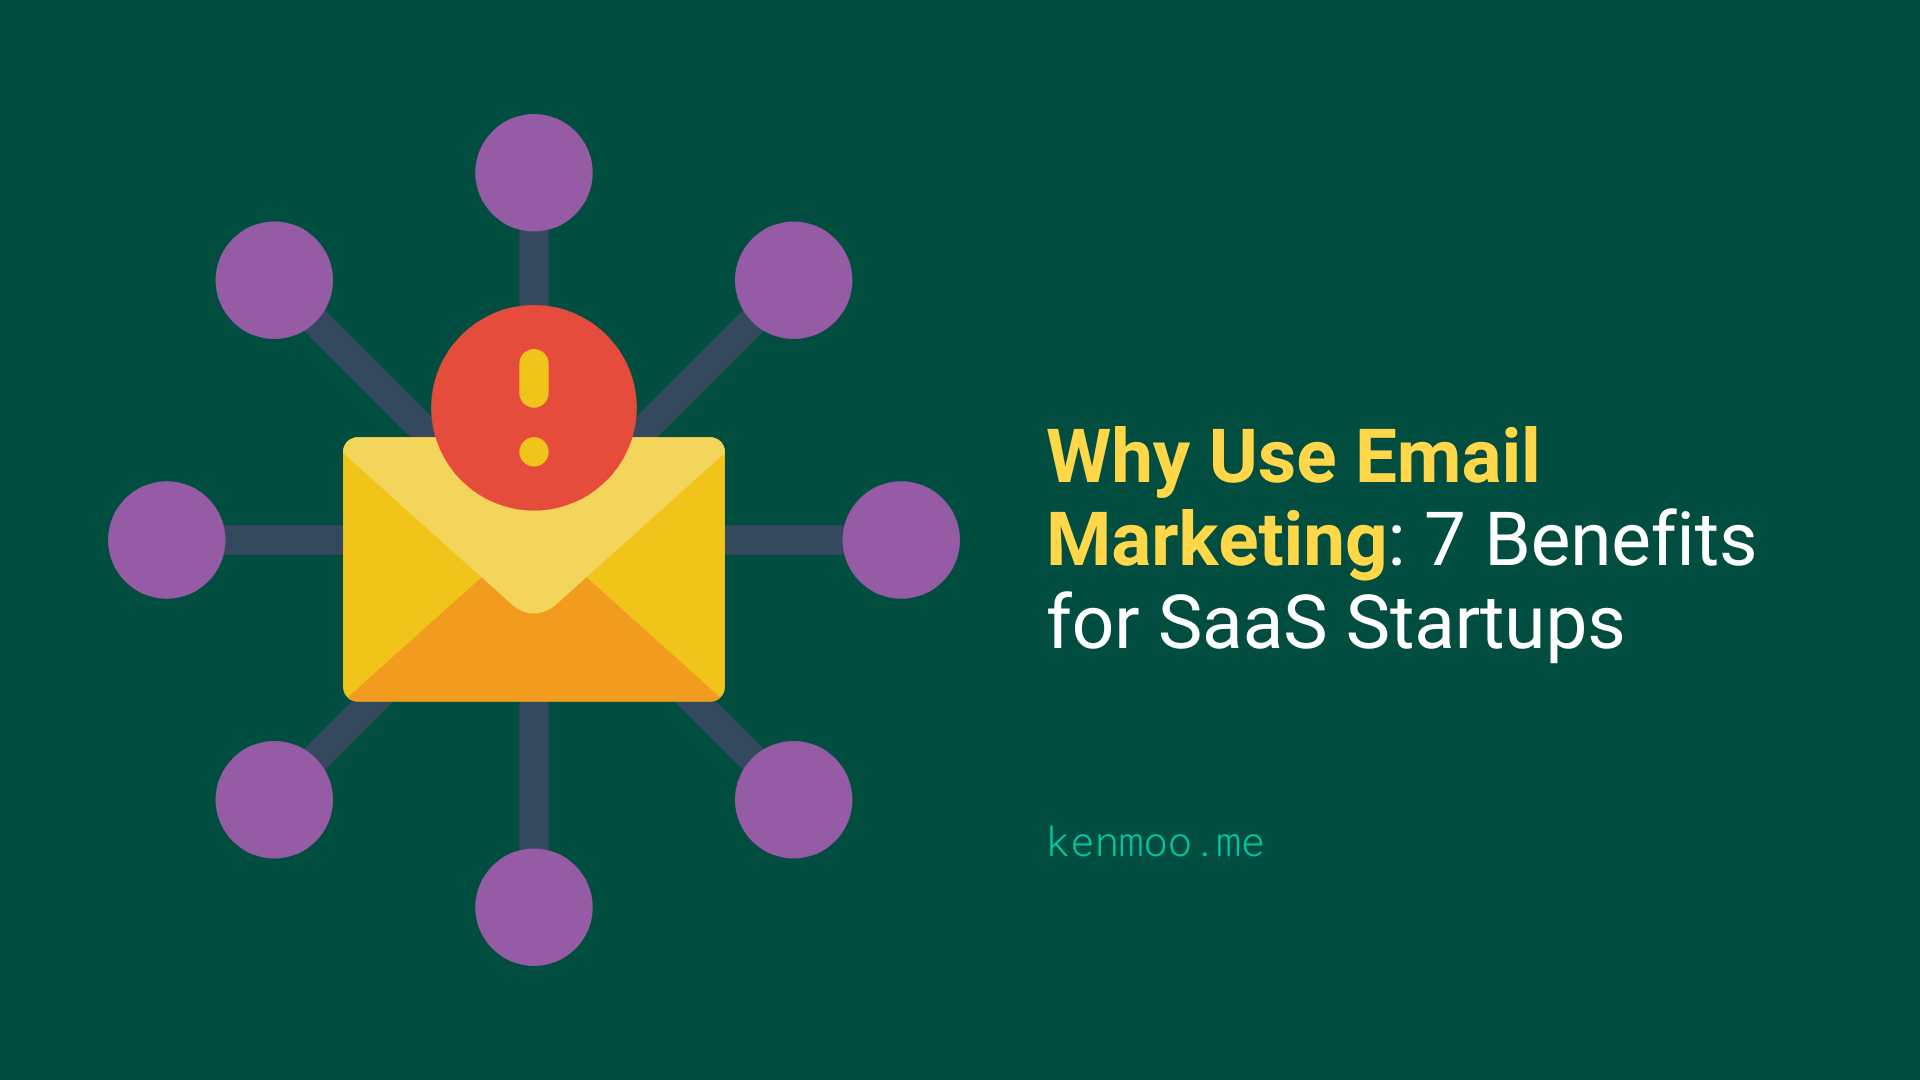 Why Use Email Marketing: 7 Benefits for SaaS Startups